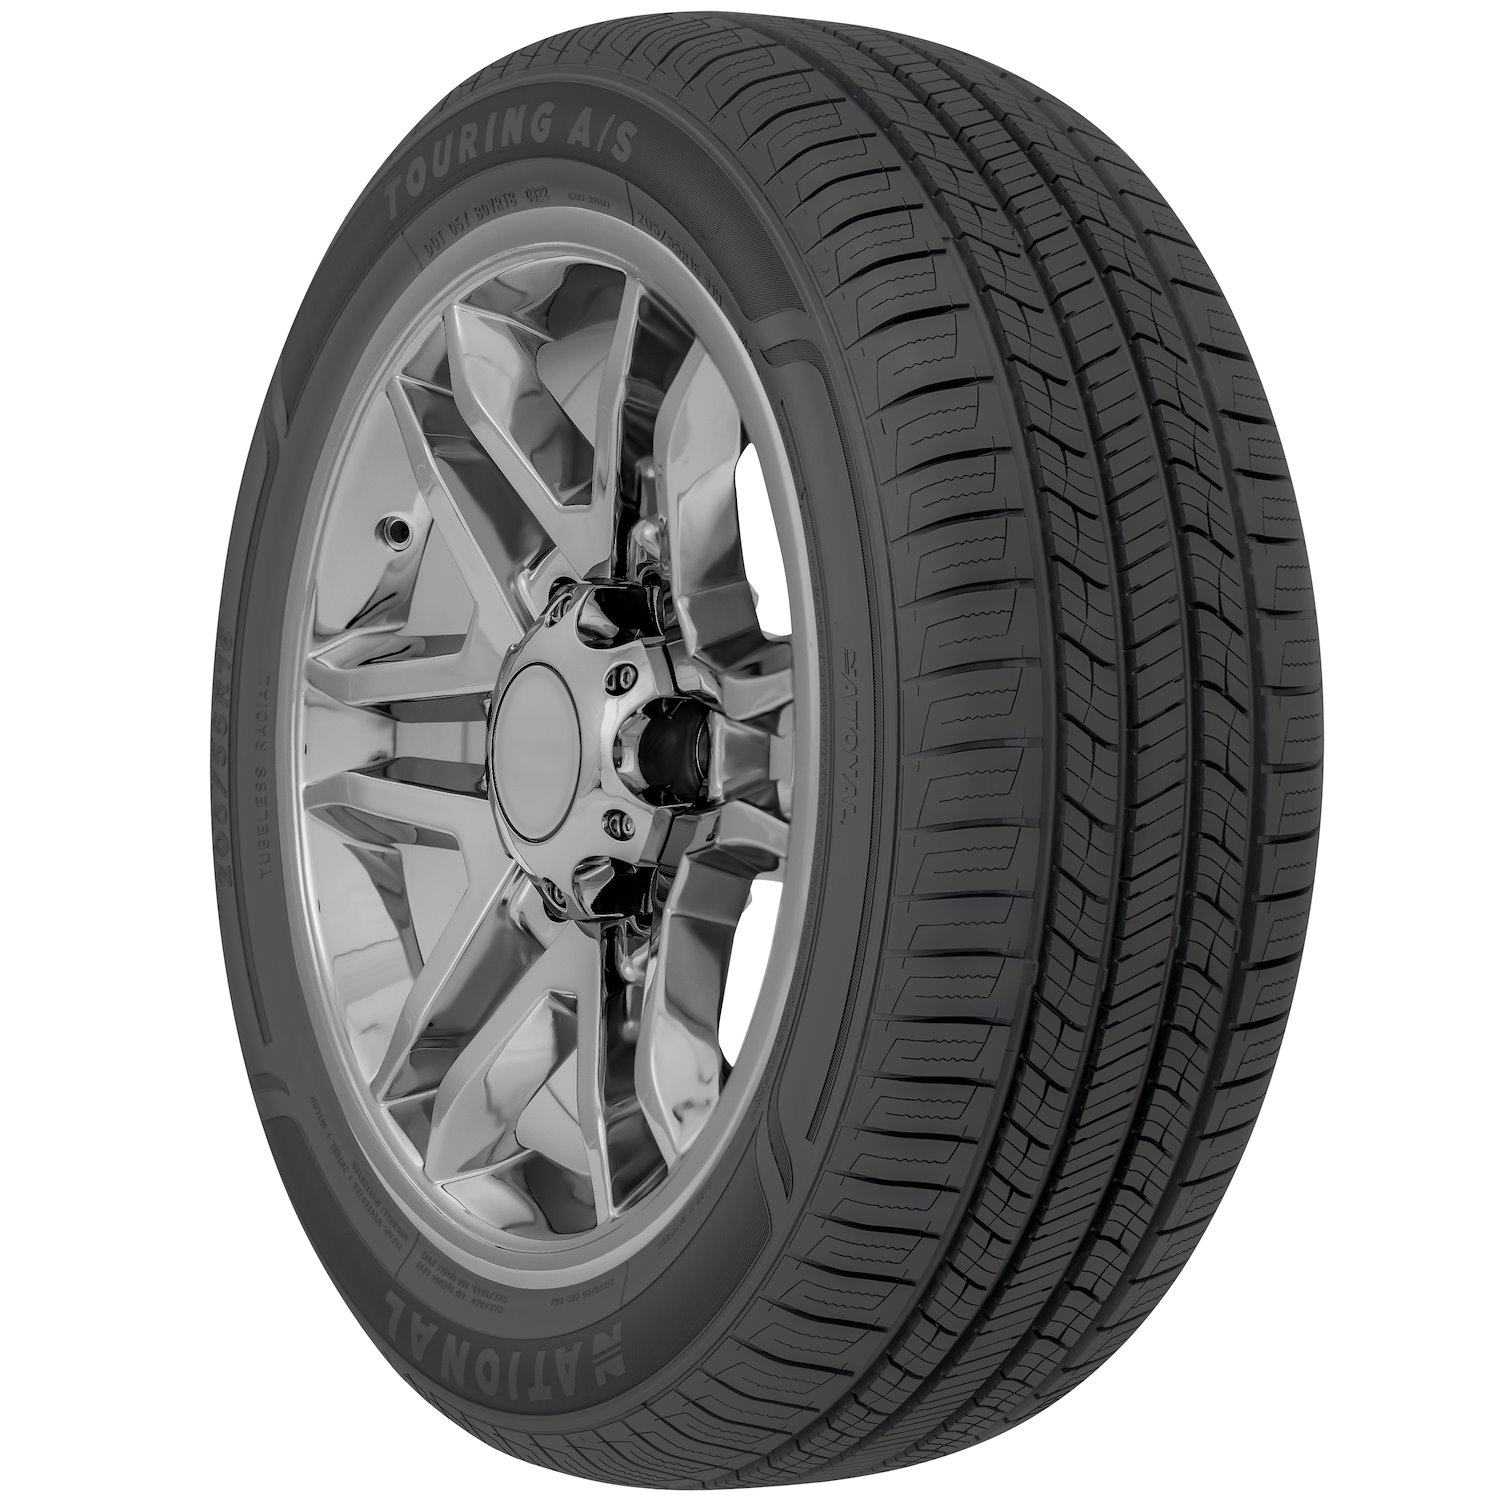 NLR13 Touring A/S Tire, 235/50R18